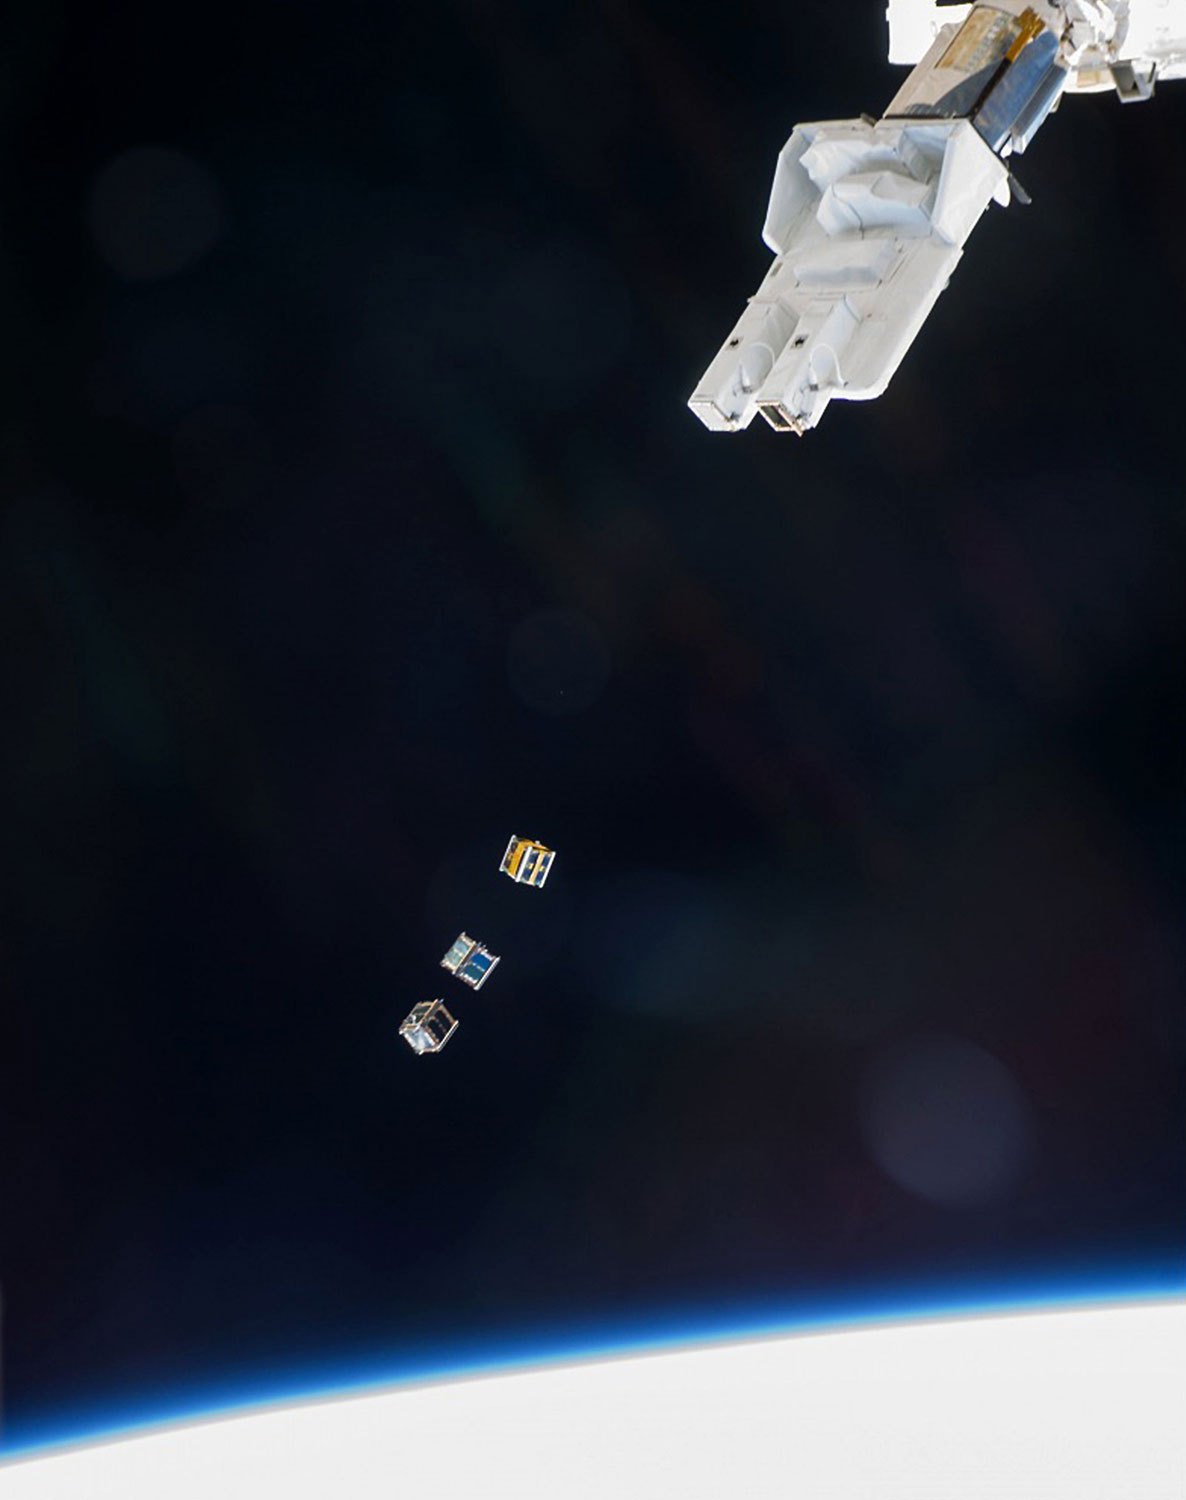 Three nanosatellites, known as Cubesats, are deployed on Nov. 19, 2013 from a Small Satellite Orbital Deployer (SSOD) attached to the a robotic arm on the International Space Station.